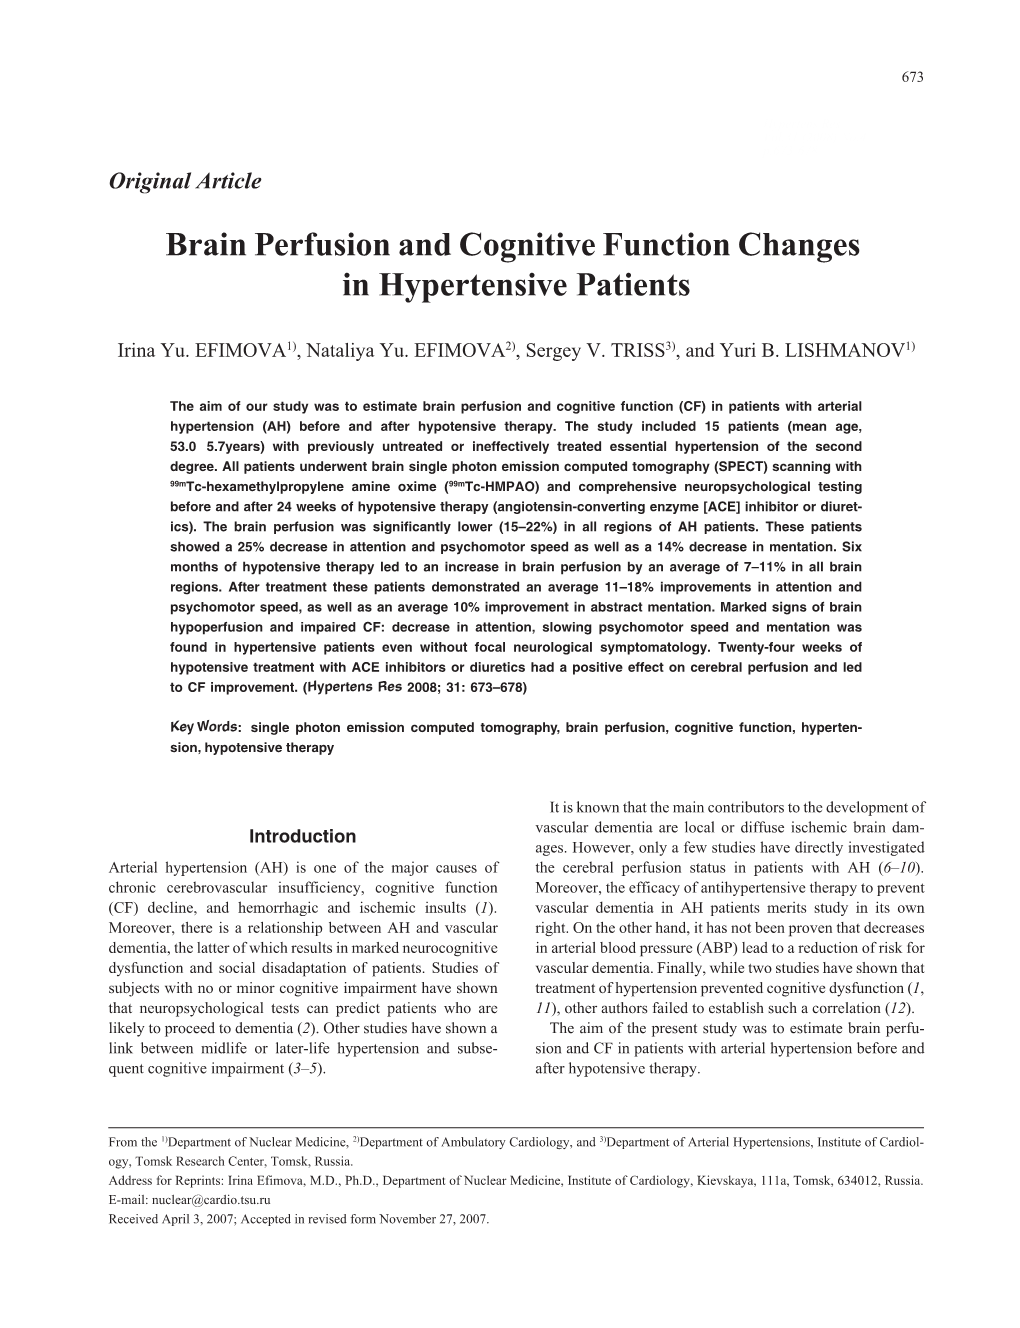 Brain Perfusion and Cognitive Function Changes in Hypertensive Patients